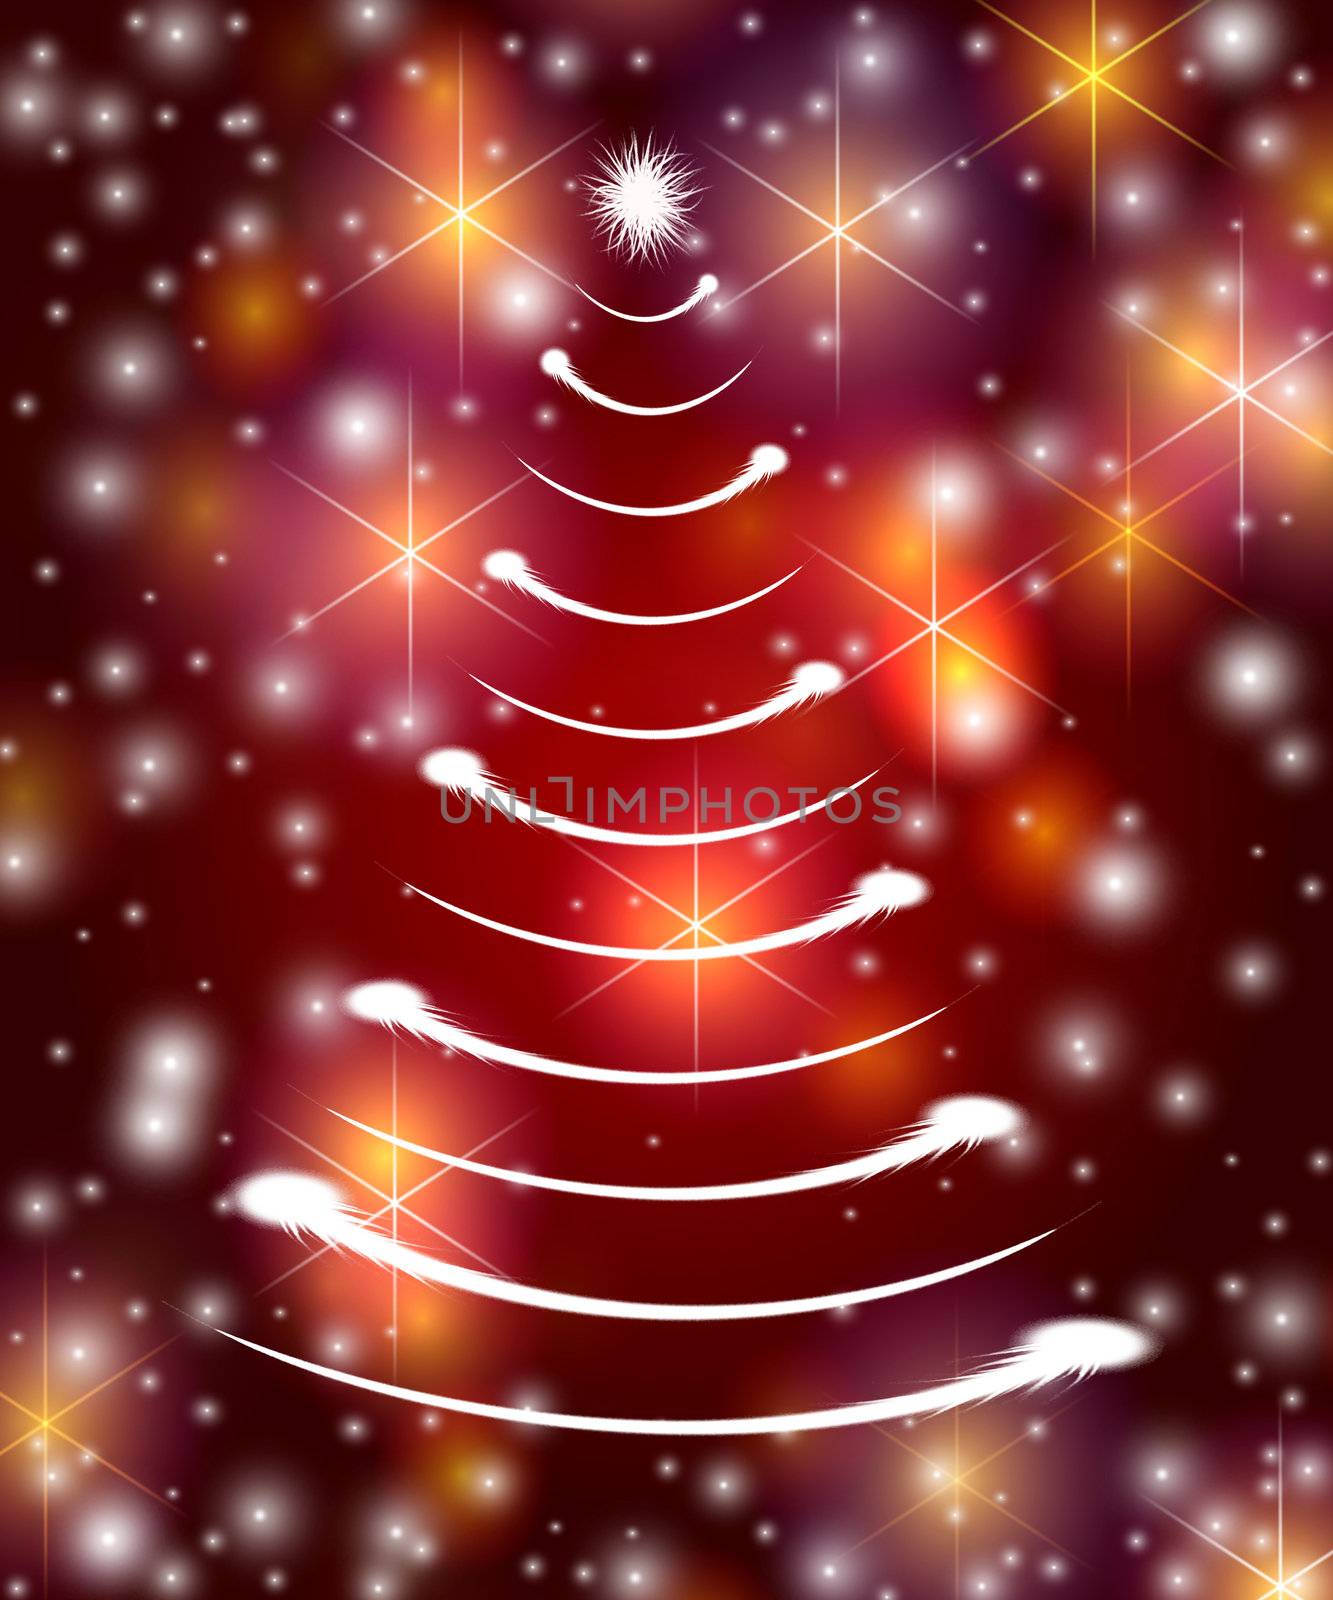 christmas tree drawn by white lights over red background with stars